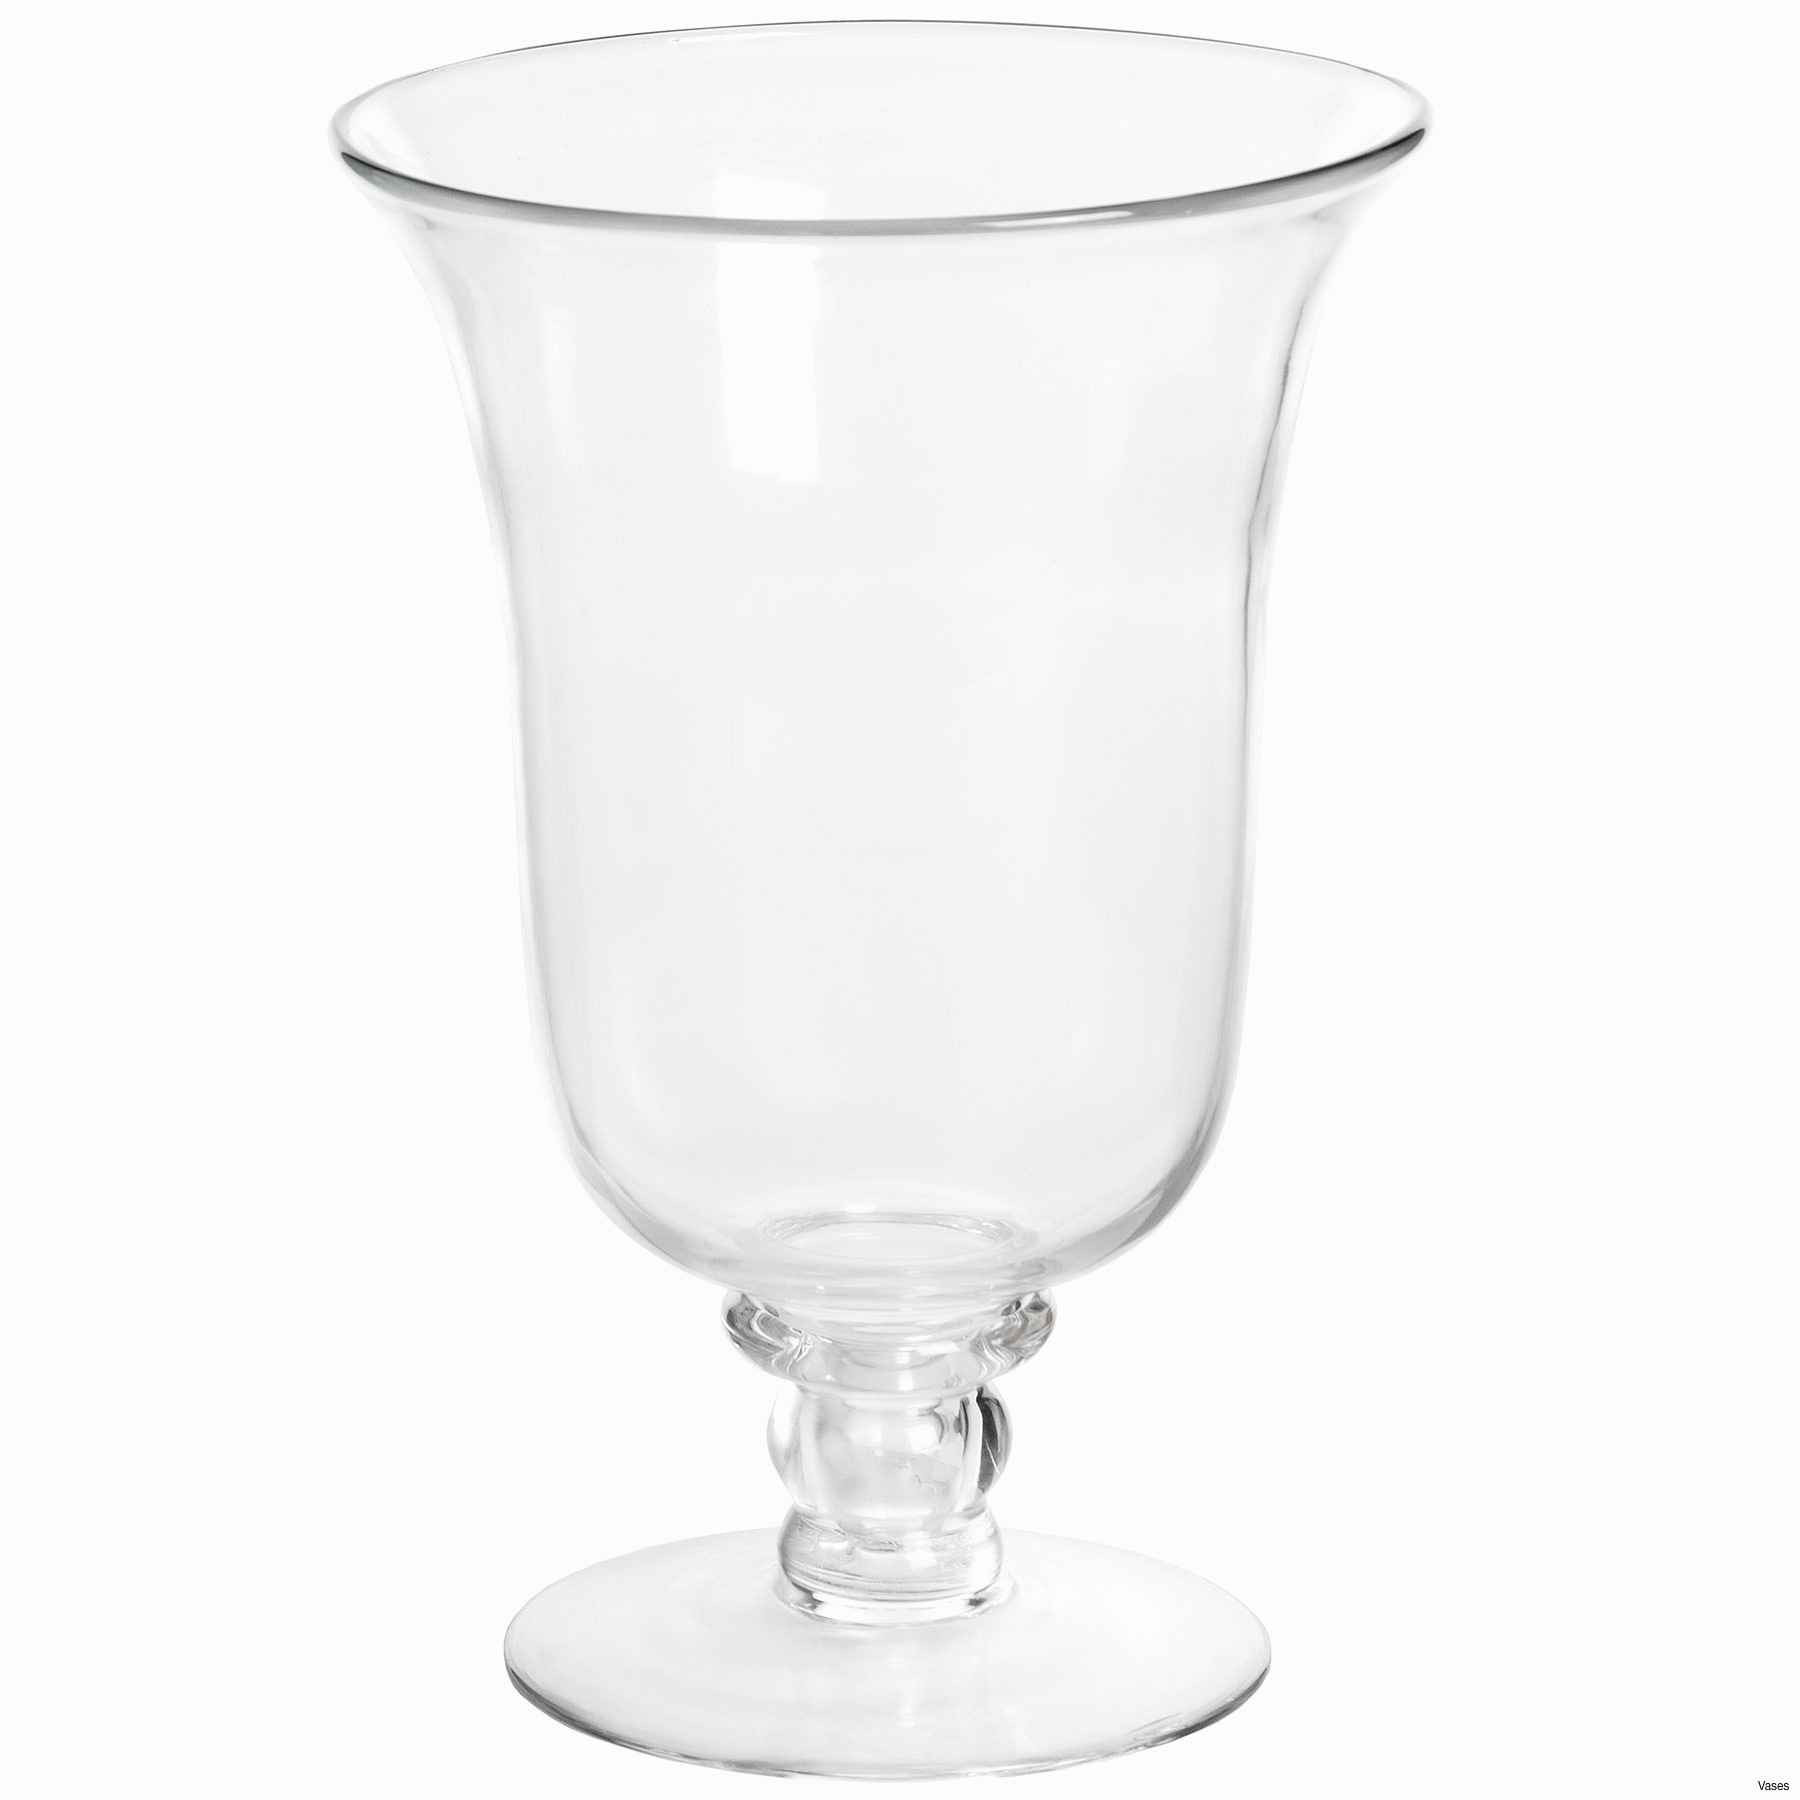 25 Lovely Cheap Glass Cylinder Vases wholesale 2024 free download cheap glass cylinder vases wholesale of candle stands wholesale lovely faux crystal candle holders alive with candle stands wholesale lovely faux crystal candle holders alive vases gold tall